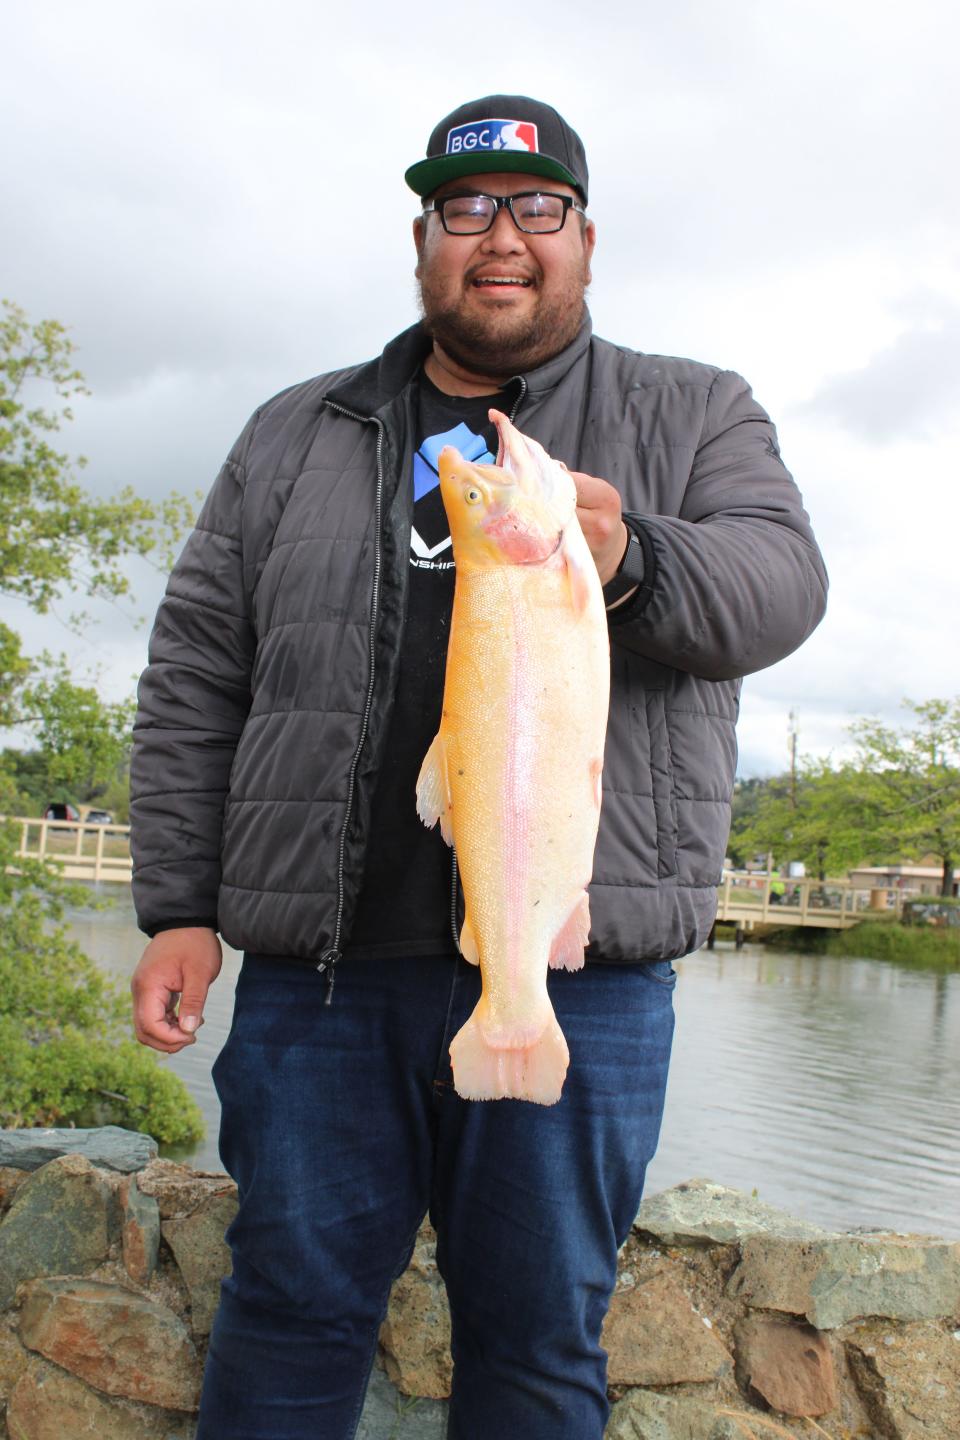 Genesis Ednalino of Fremont won first place in the adult division of the NorCal Trout Angler’s Challenge by catching this hefty 4.93 lb. lightning trout from shore on May 6.